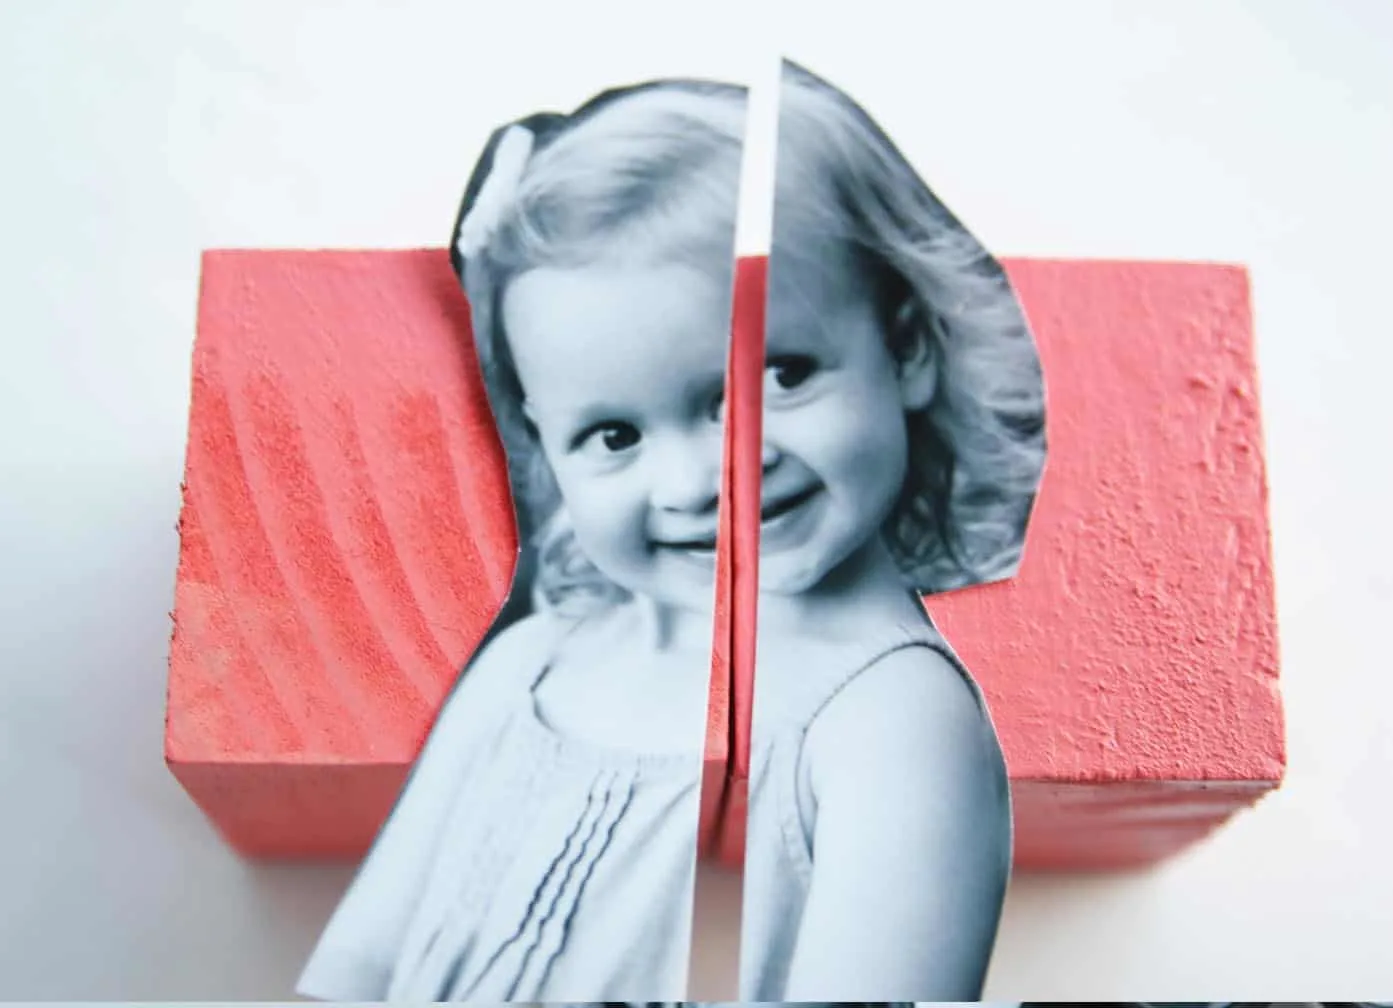 Make a modern twist on some photo blocks by using black and white pictures. Your child will love playing with them!